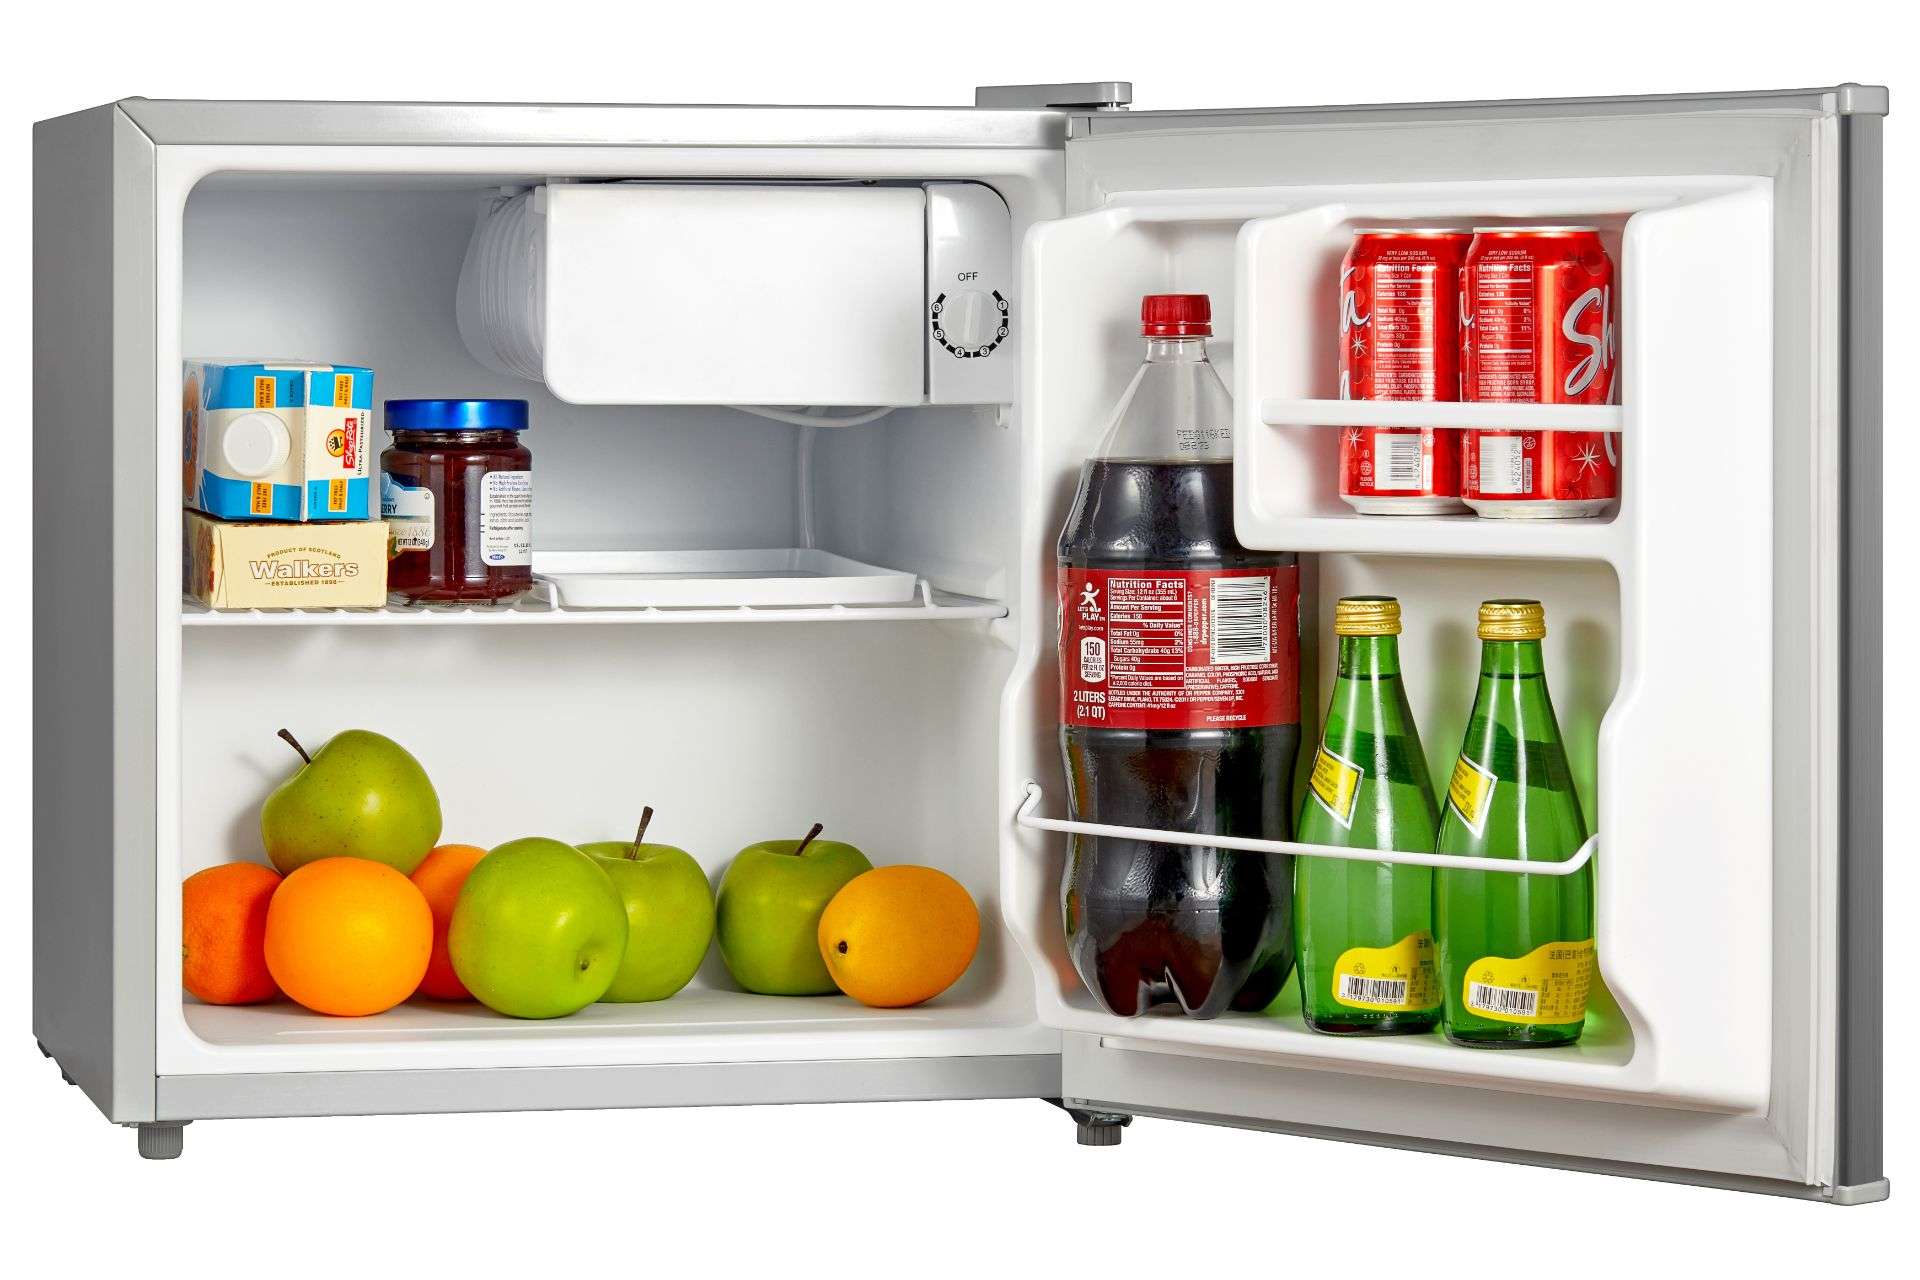 Midea Refrigerators Small: Perfect Fit for Cozy Kitchens